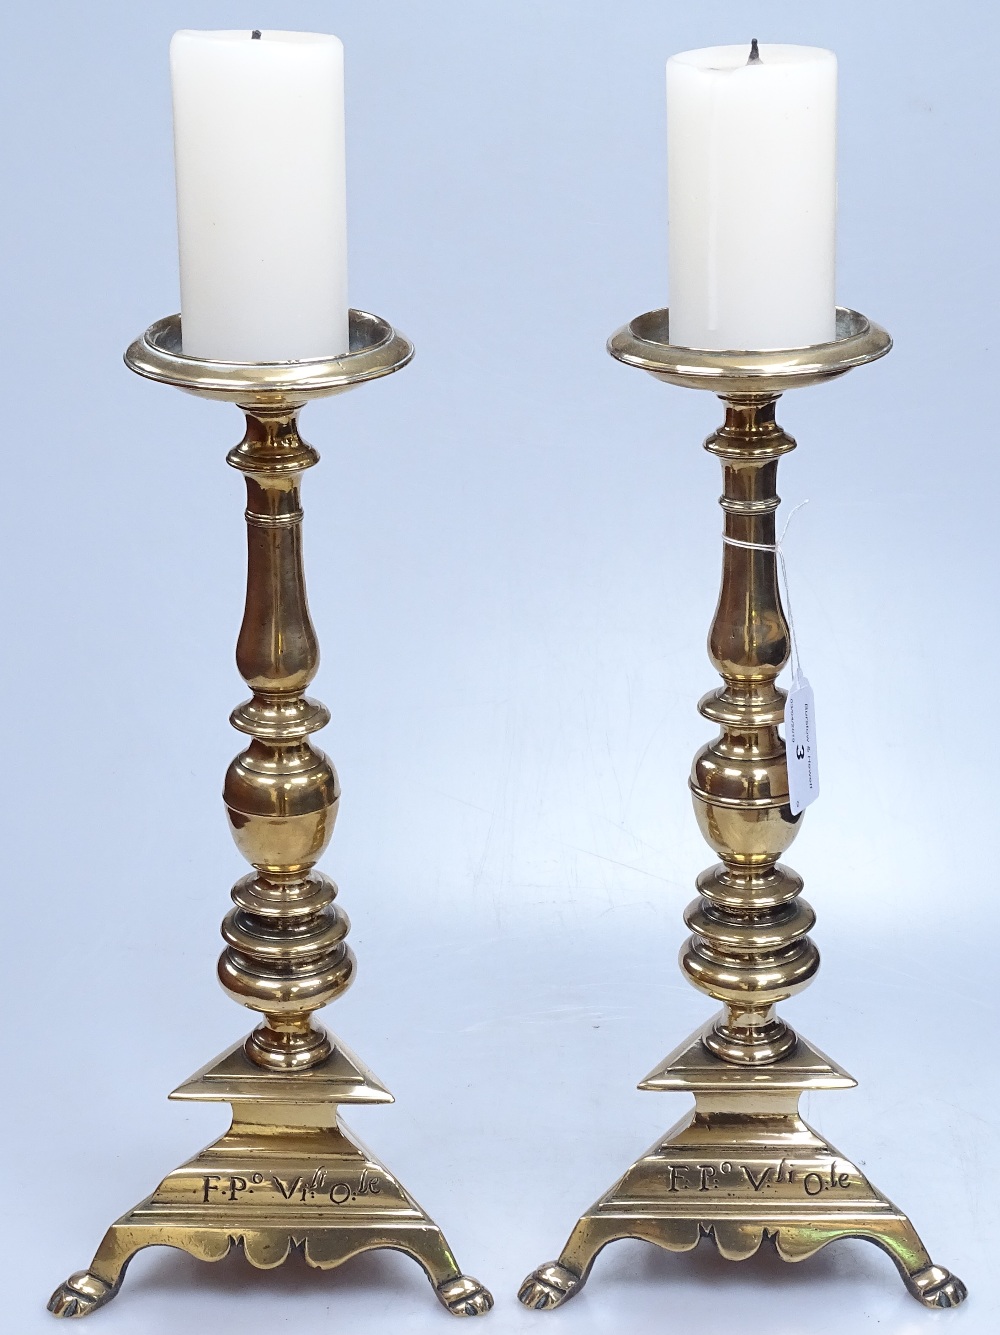 A pair of 18th century brass pricket candle stands, with inscriptions to the bases, height 12.5"